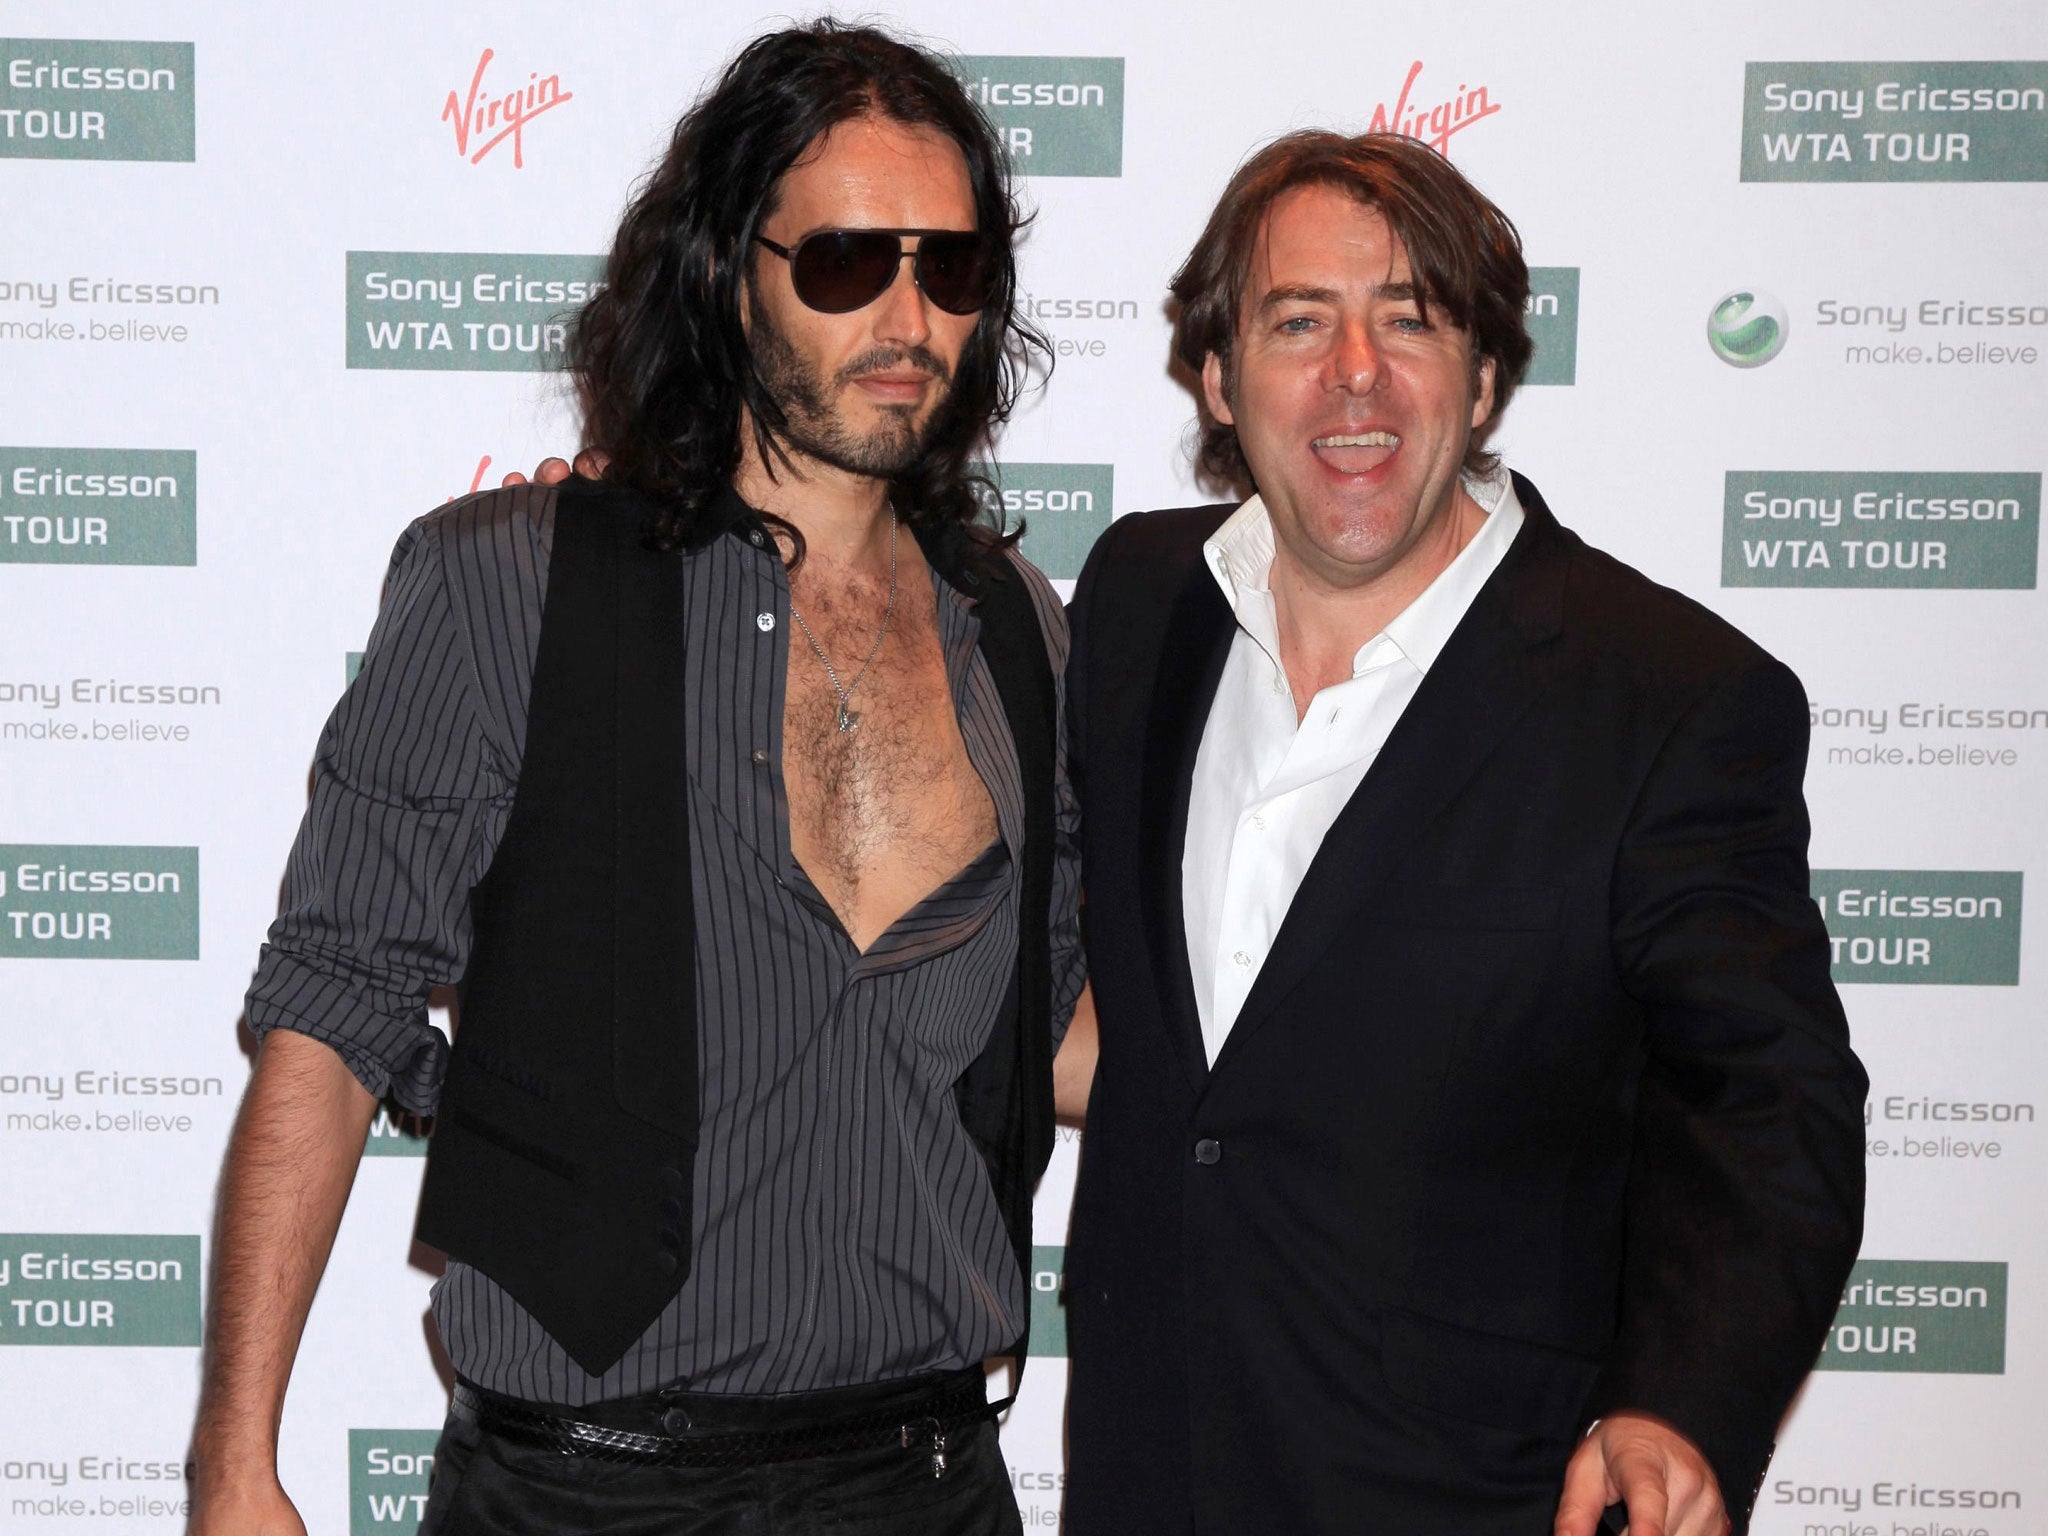 Russell Brand and Jonathan Ross have told of their regret and embarrassment about sparking the Sachsgate scandal